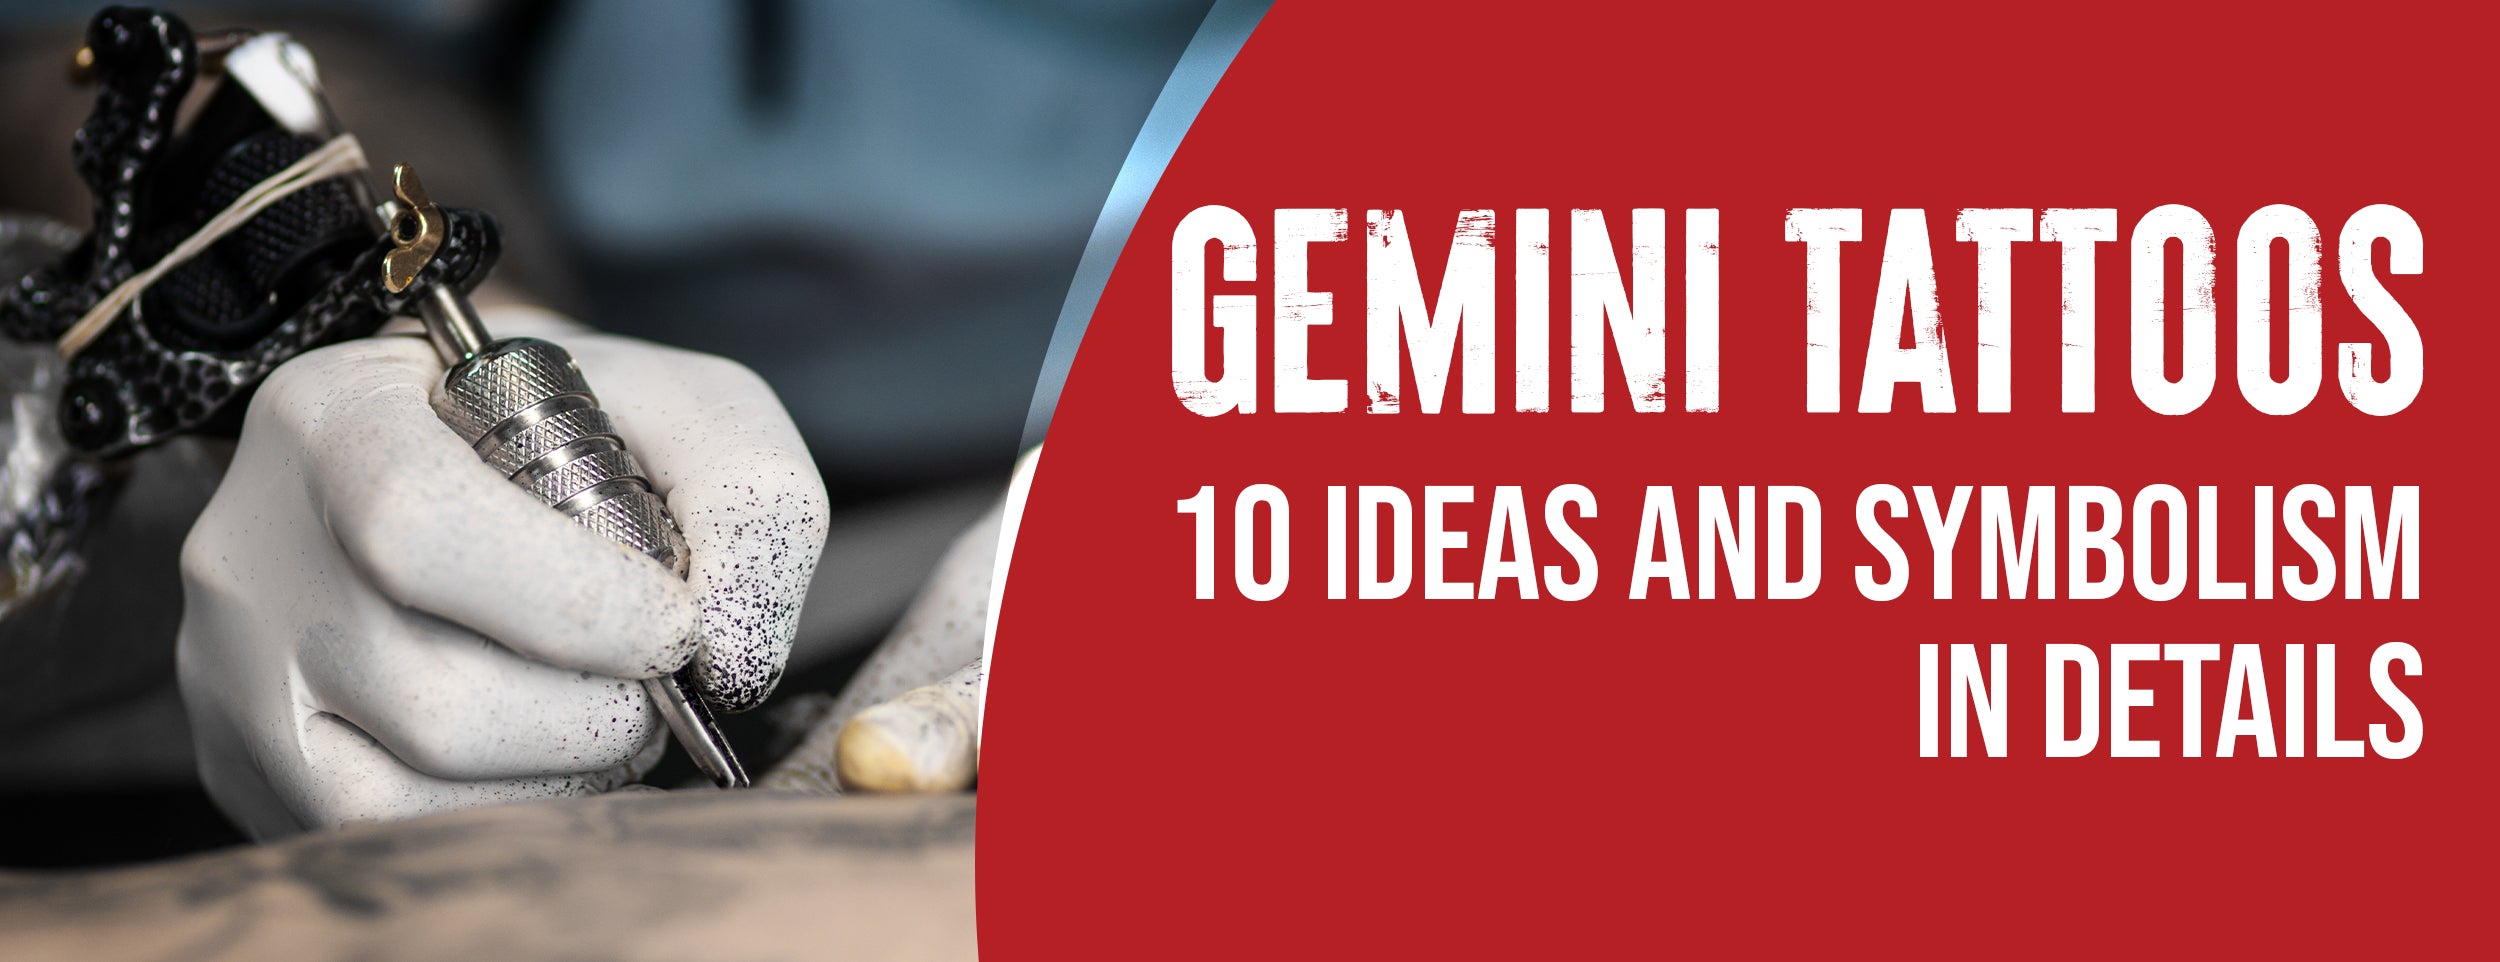 Tattoo Ideas for Geminis We'd Love to Try | FamilyMinded